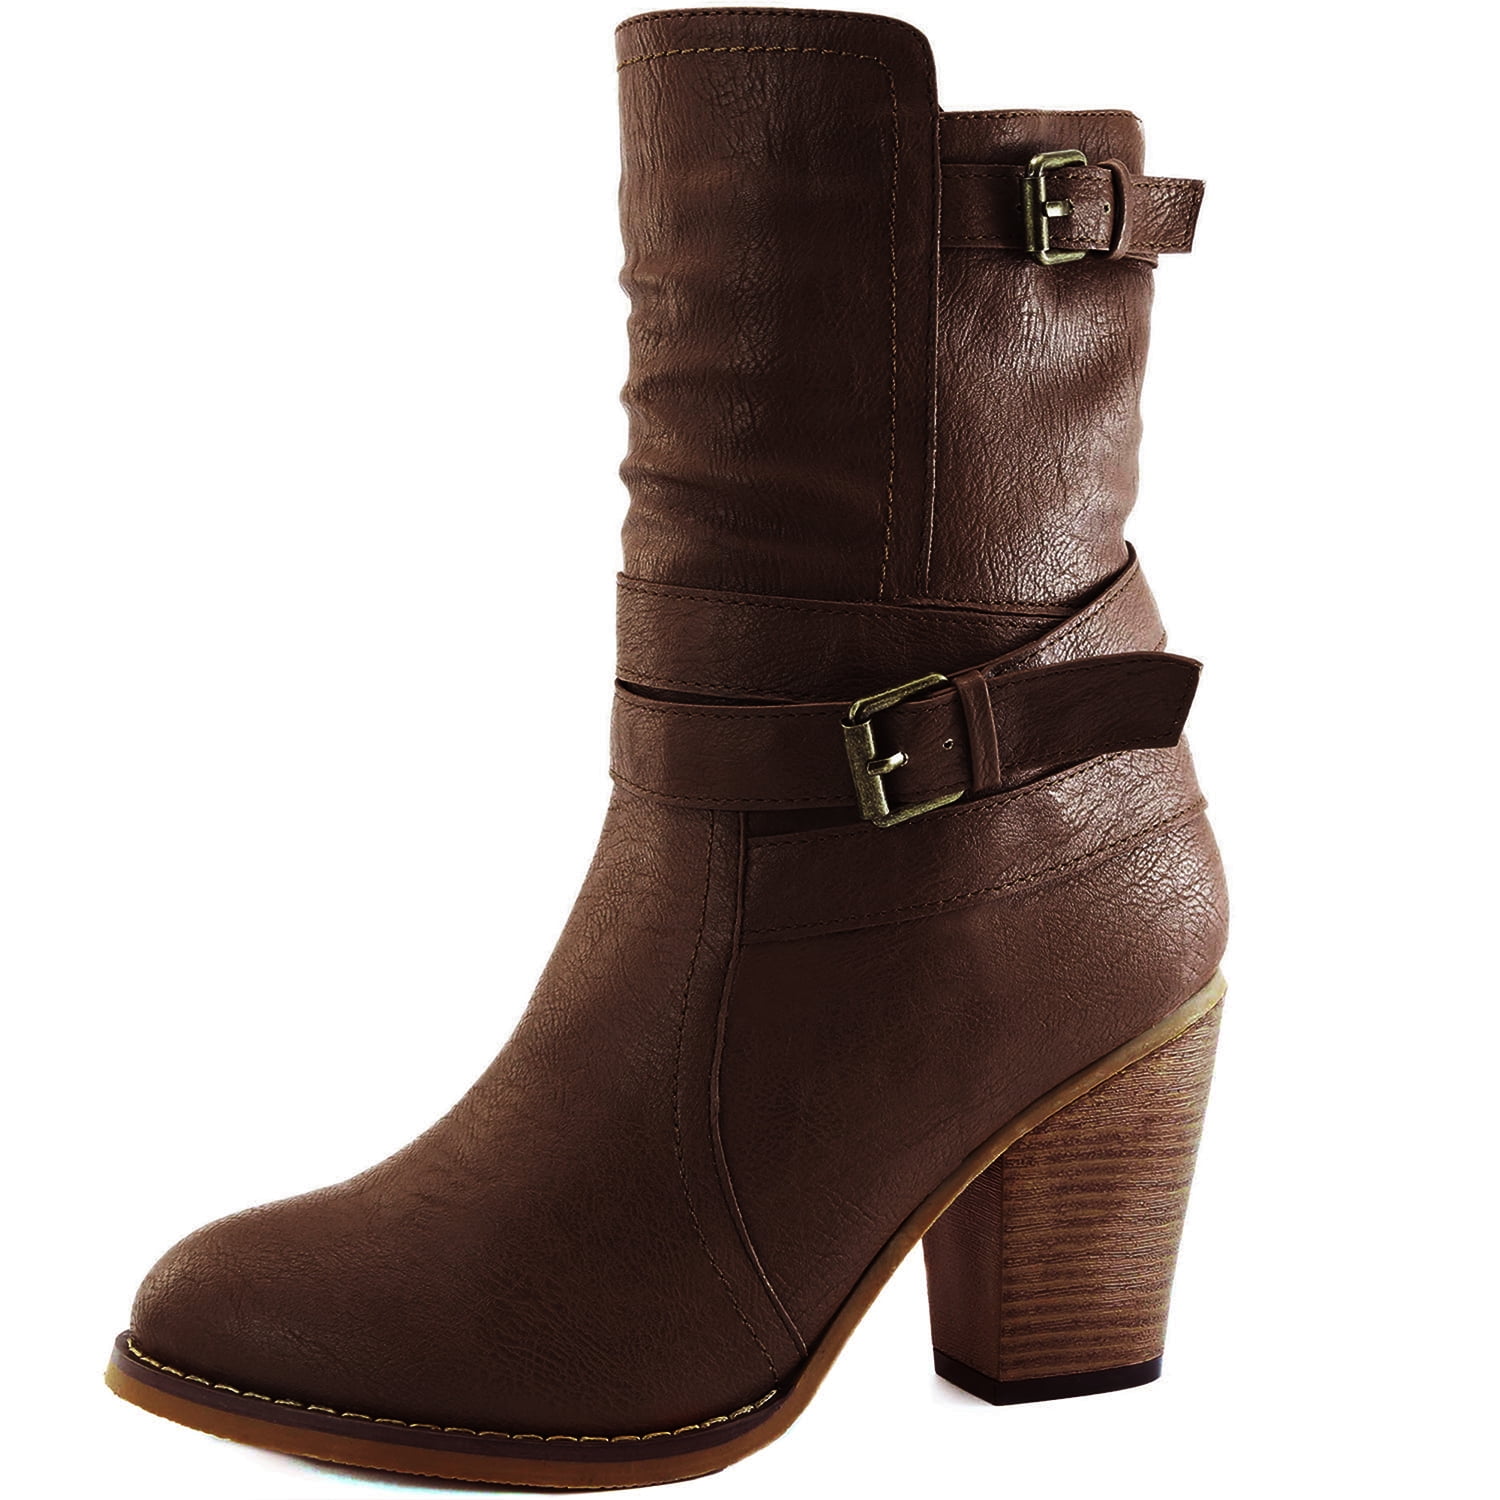 Twisted Womens Faux Leather Wide Width Slouchy Buckle Strap Mid Calf Boots